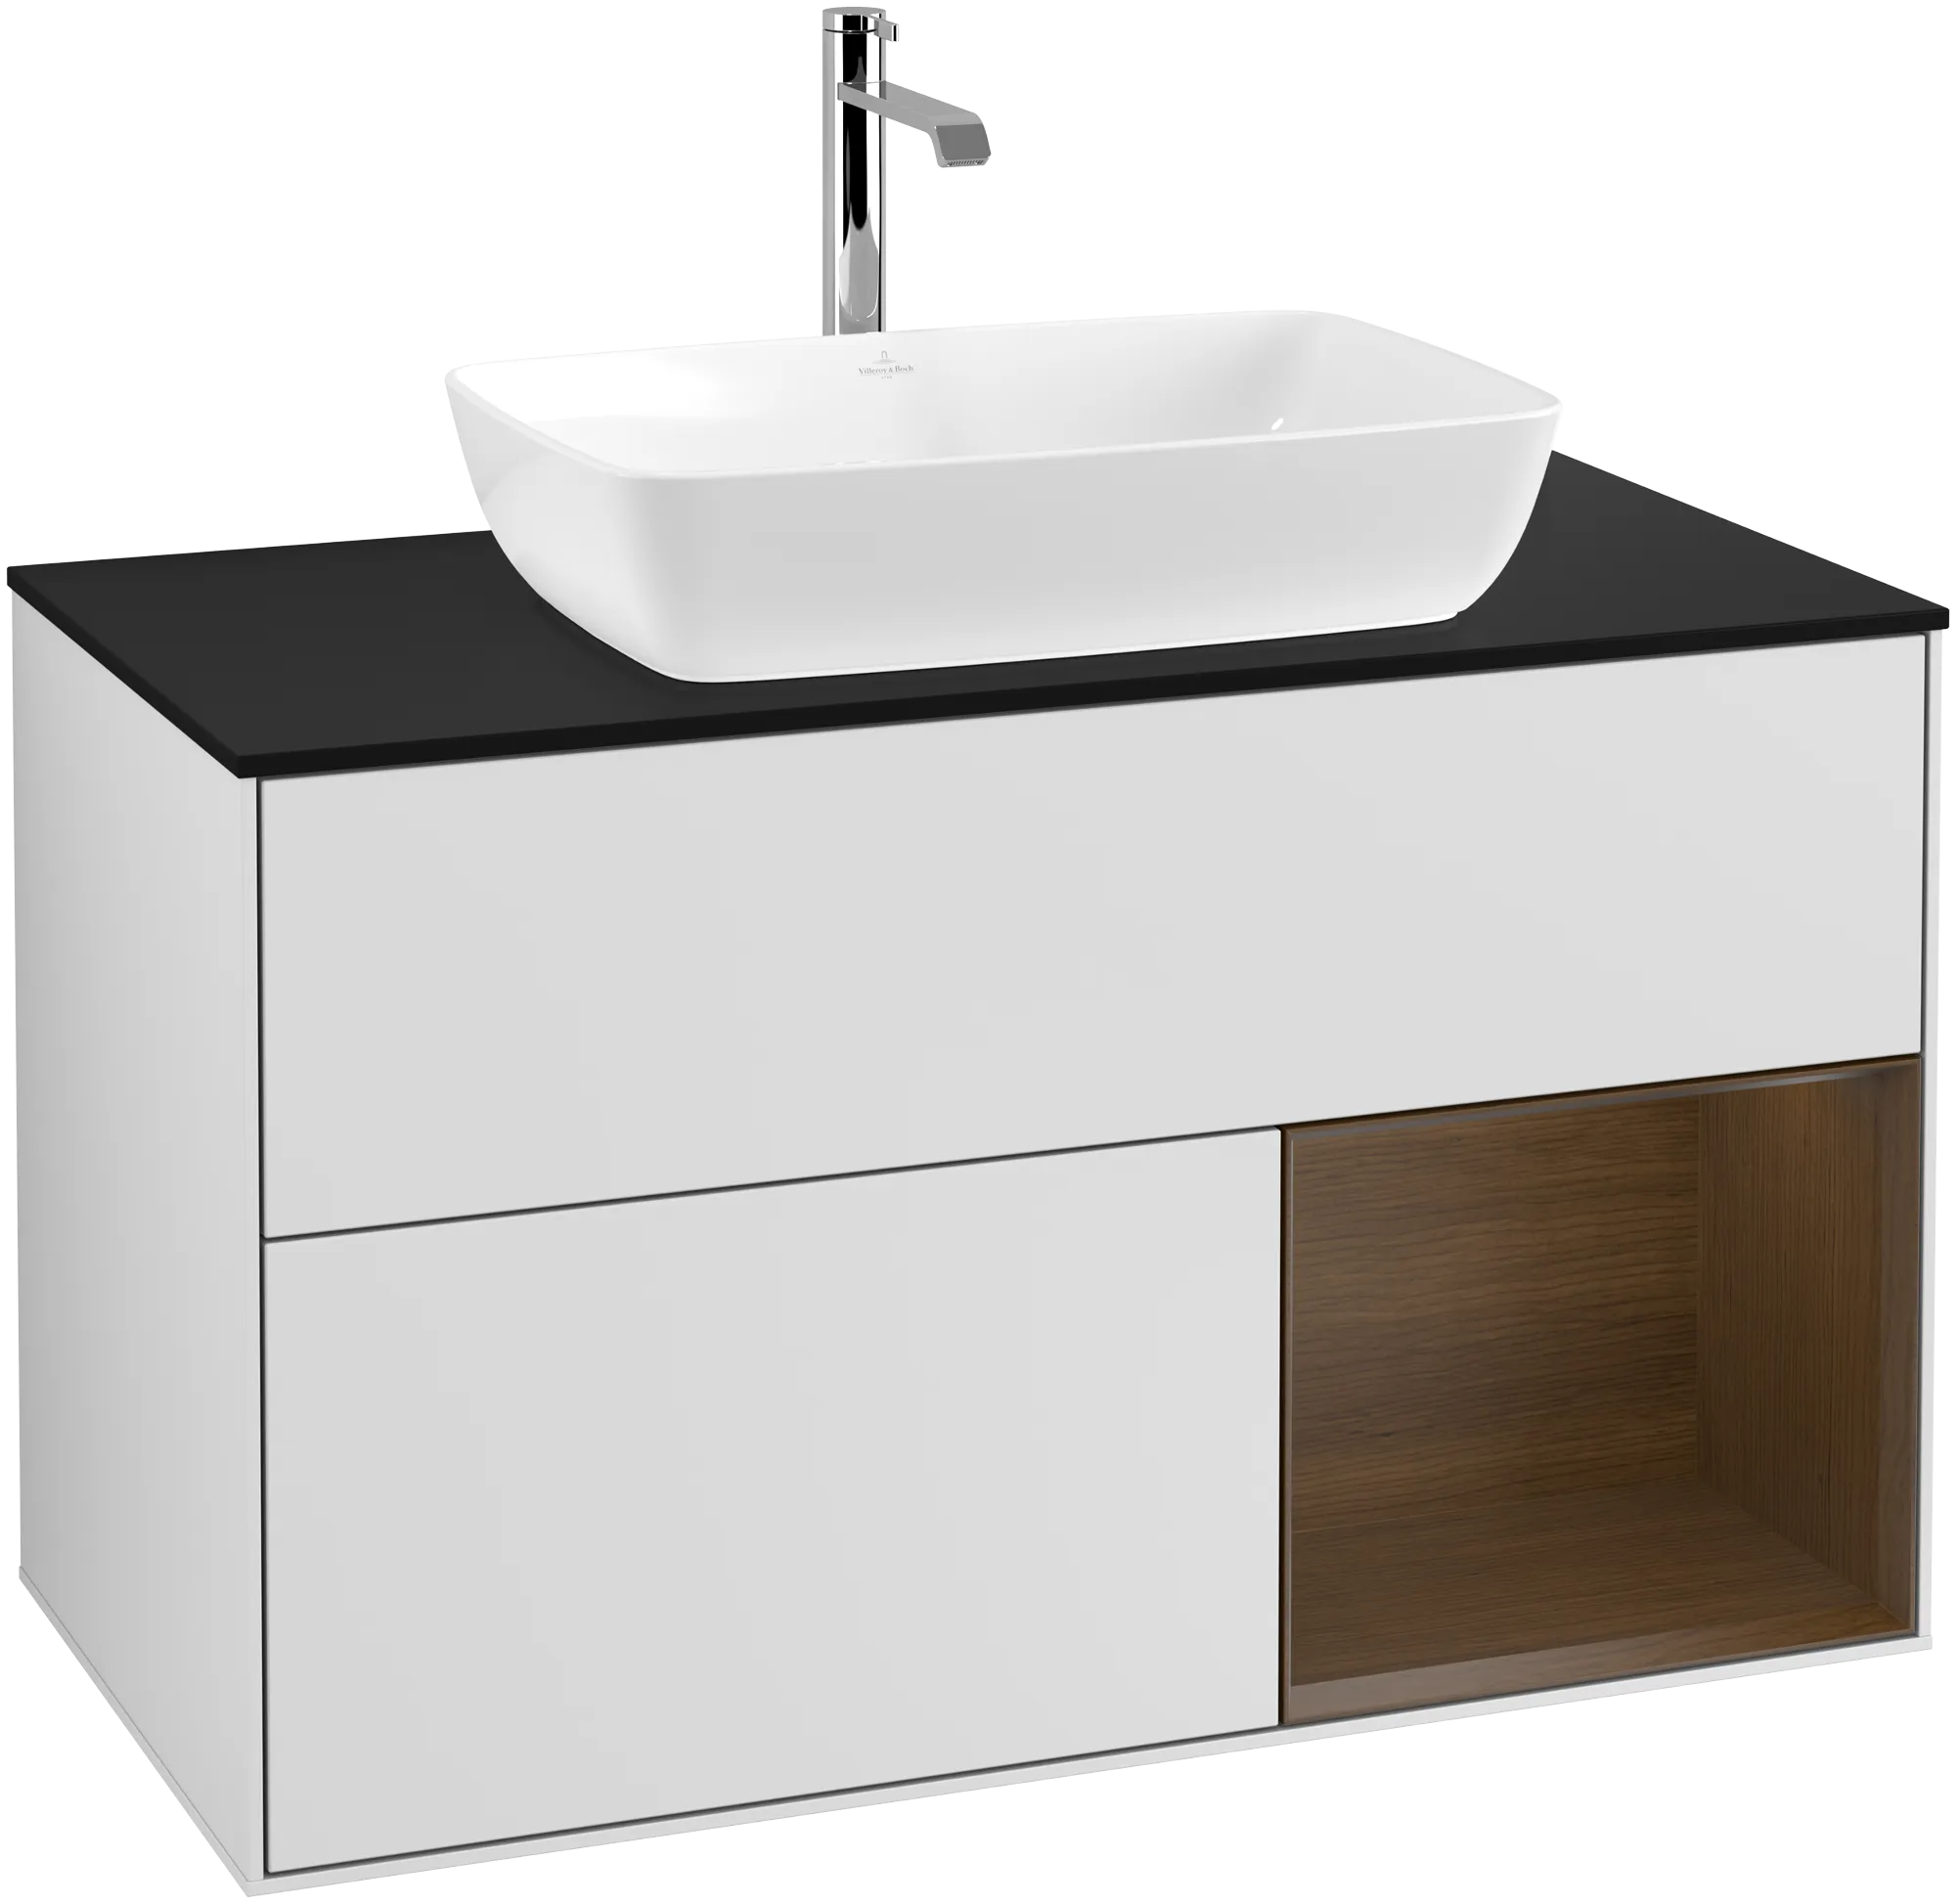 Picture of VILLEROY BOCH Finion Vanity unit, with lighting, 2 pull-out compartments, 1000 x 603 x 501 mm, White Matt Lacquer / Walnut Veneer / Glass Black Matt #G782GNMT